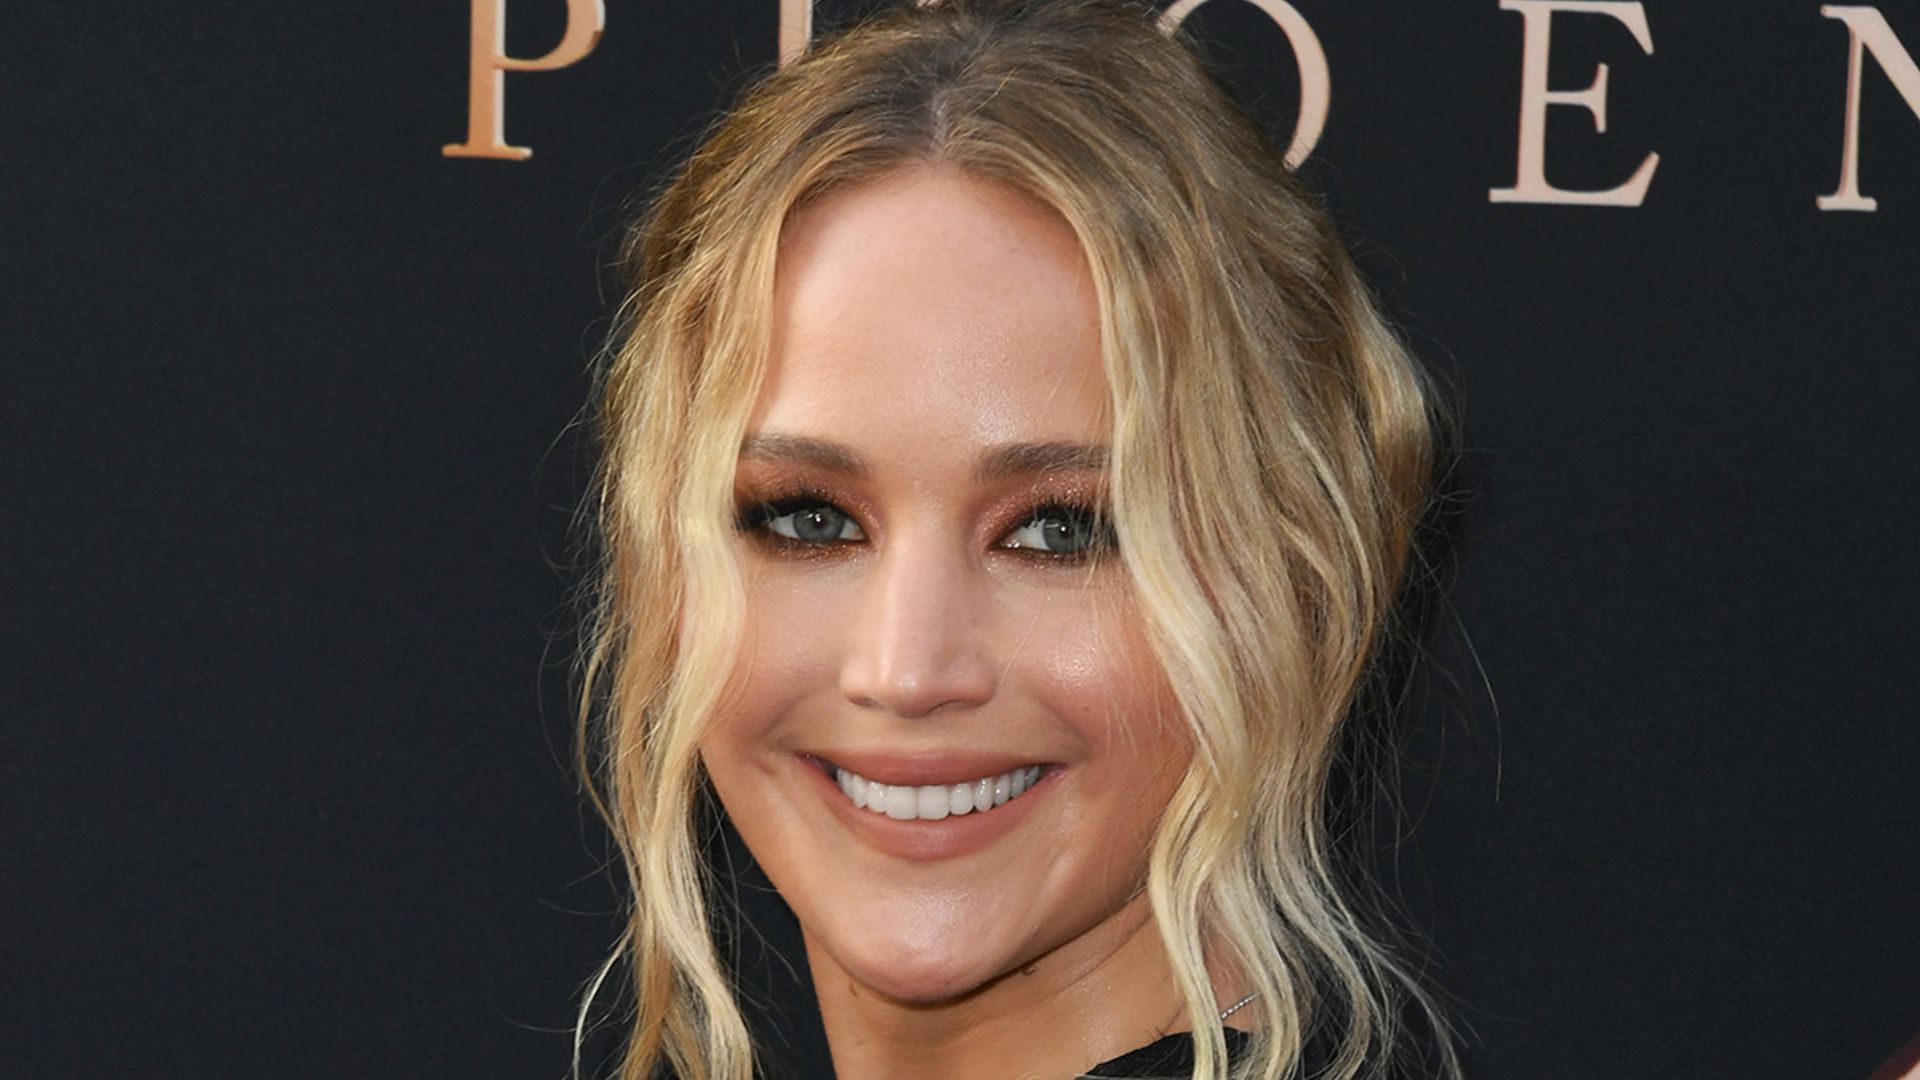 Jennifer Lawrence makes sweetest confession about fiancé Cooke Maroney